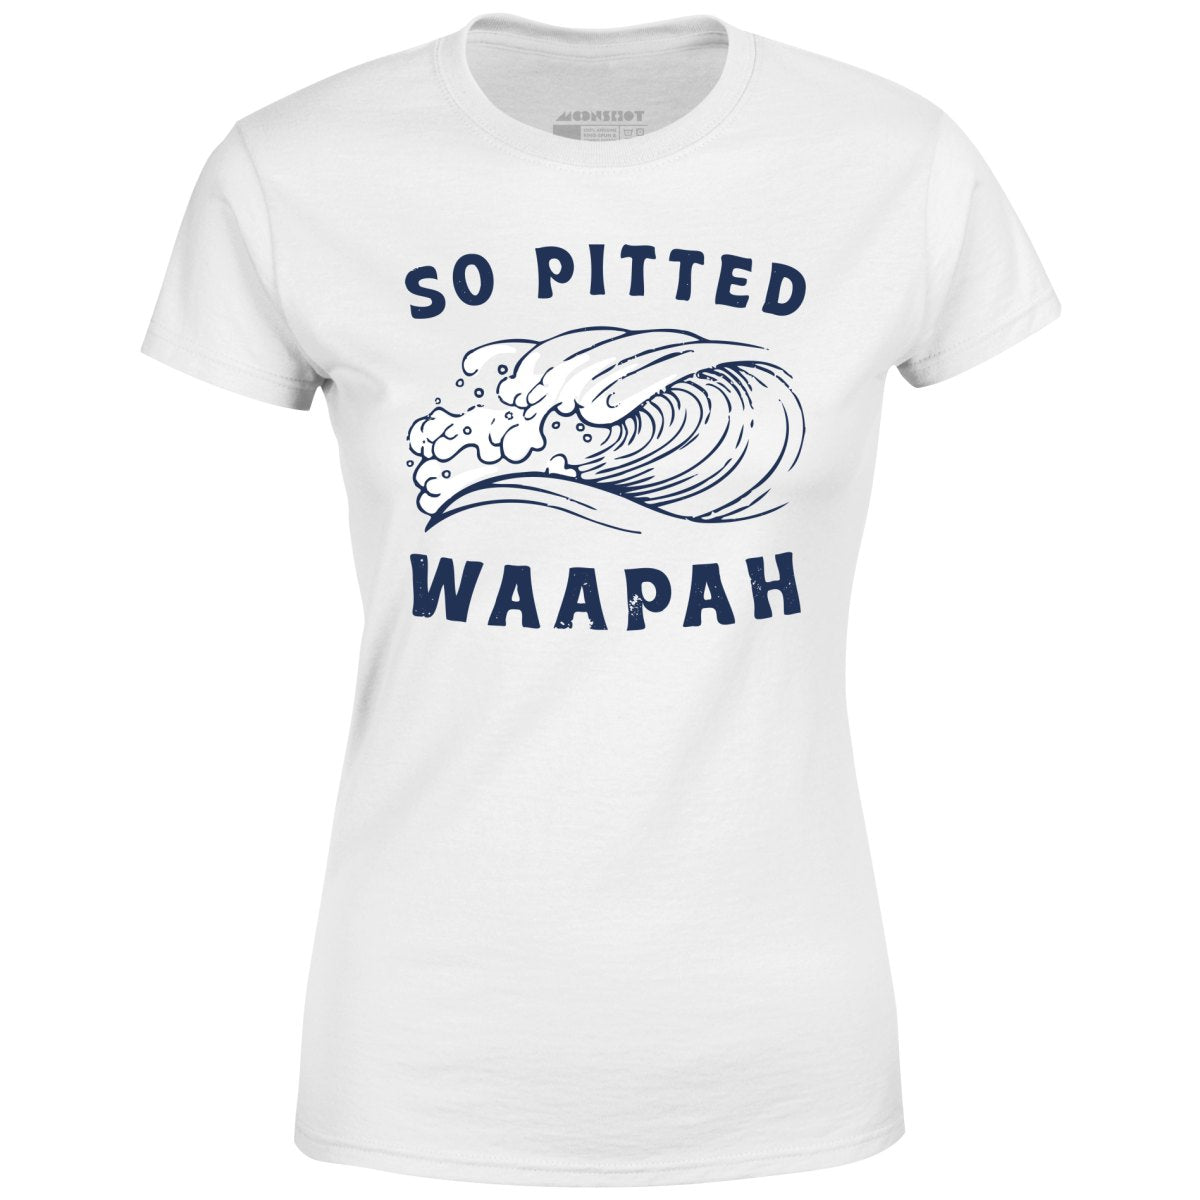 So Pitted - Women's T-Shirt